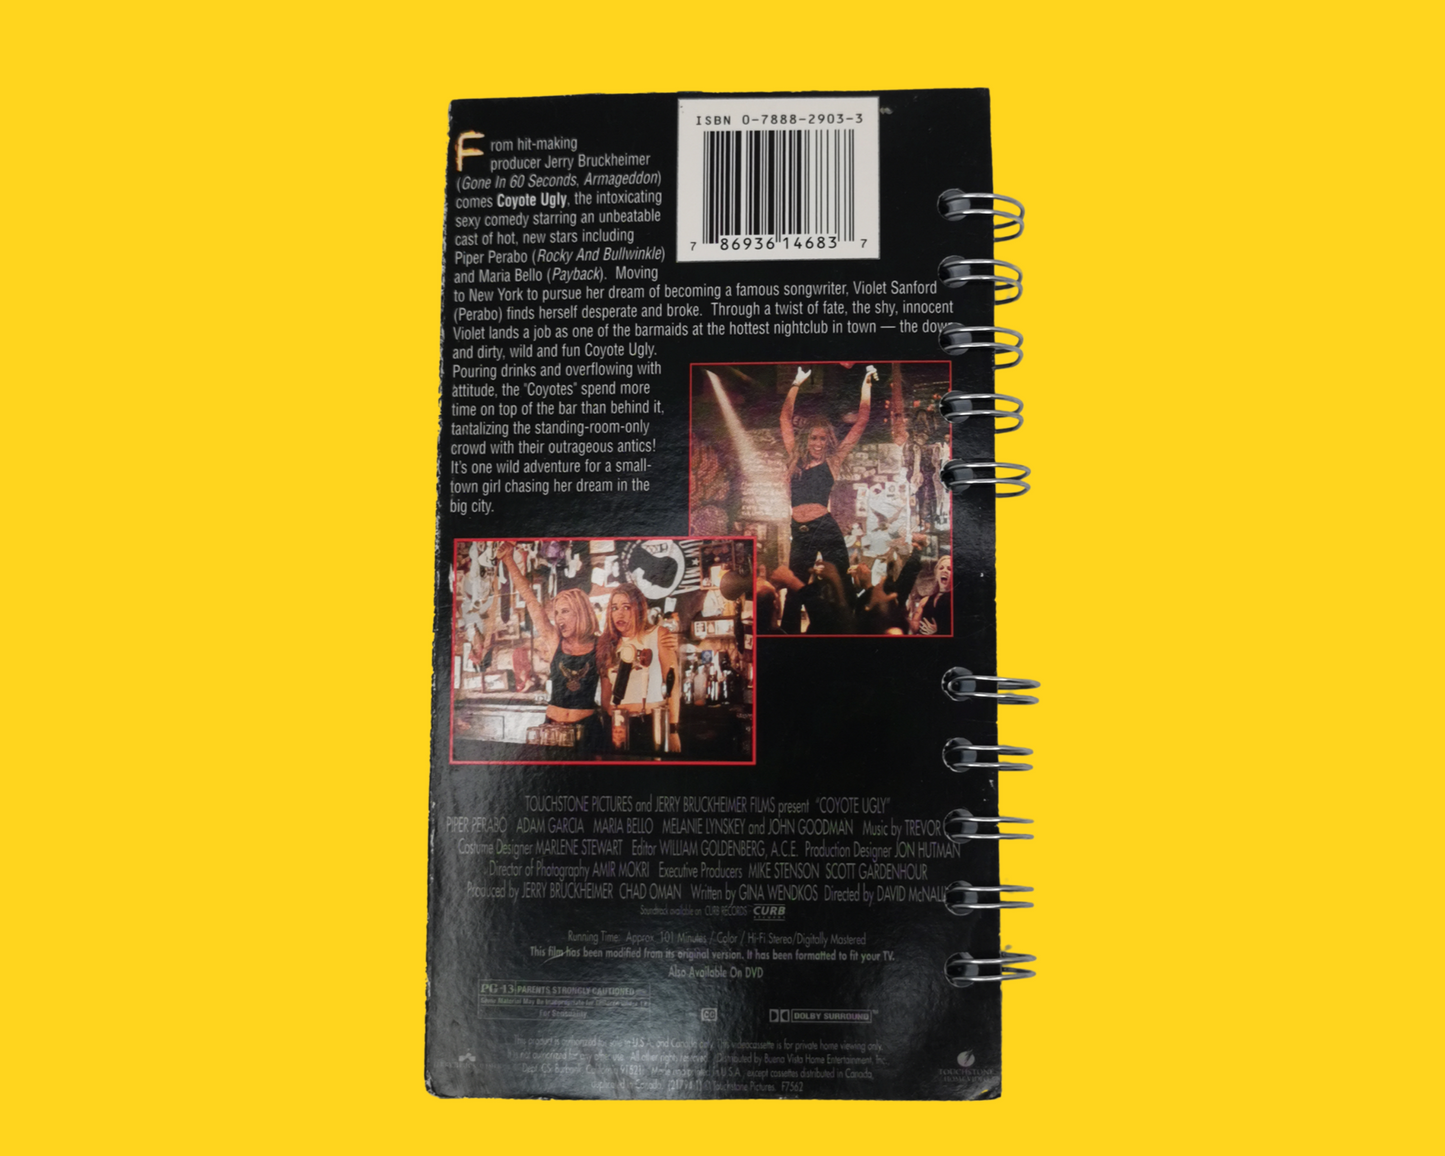 Coyote Ugly Upcycled VHS Movie Notebook